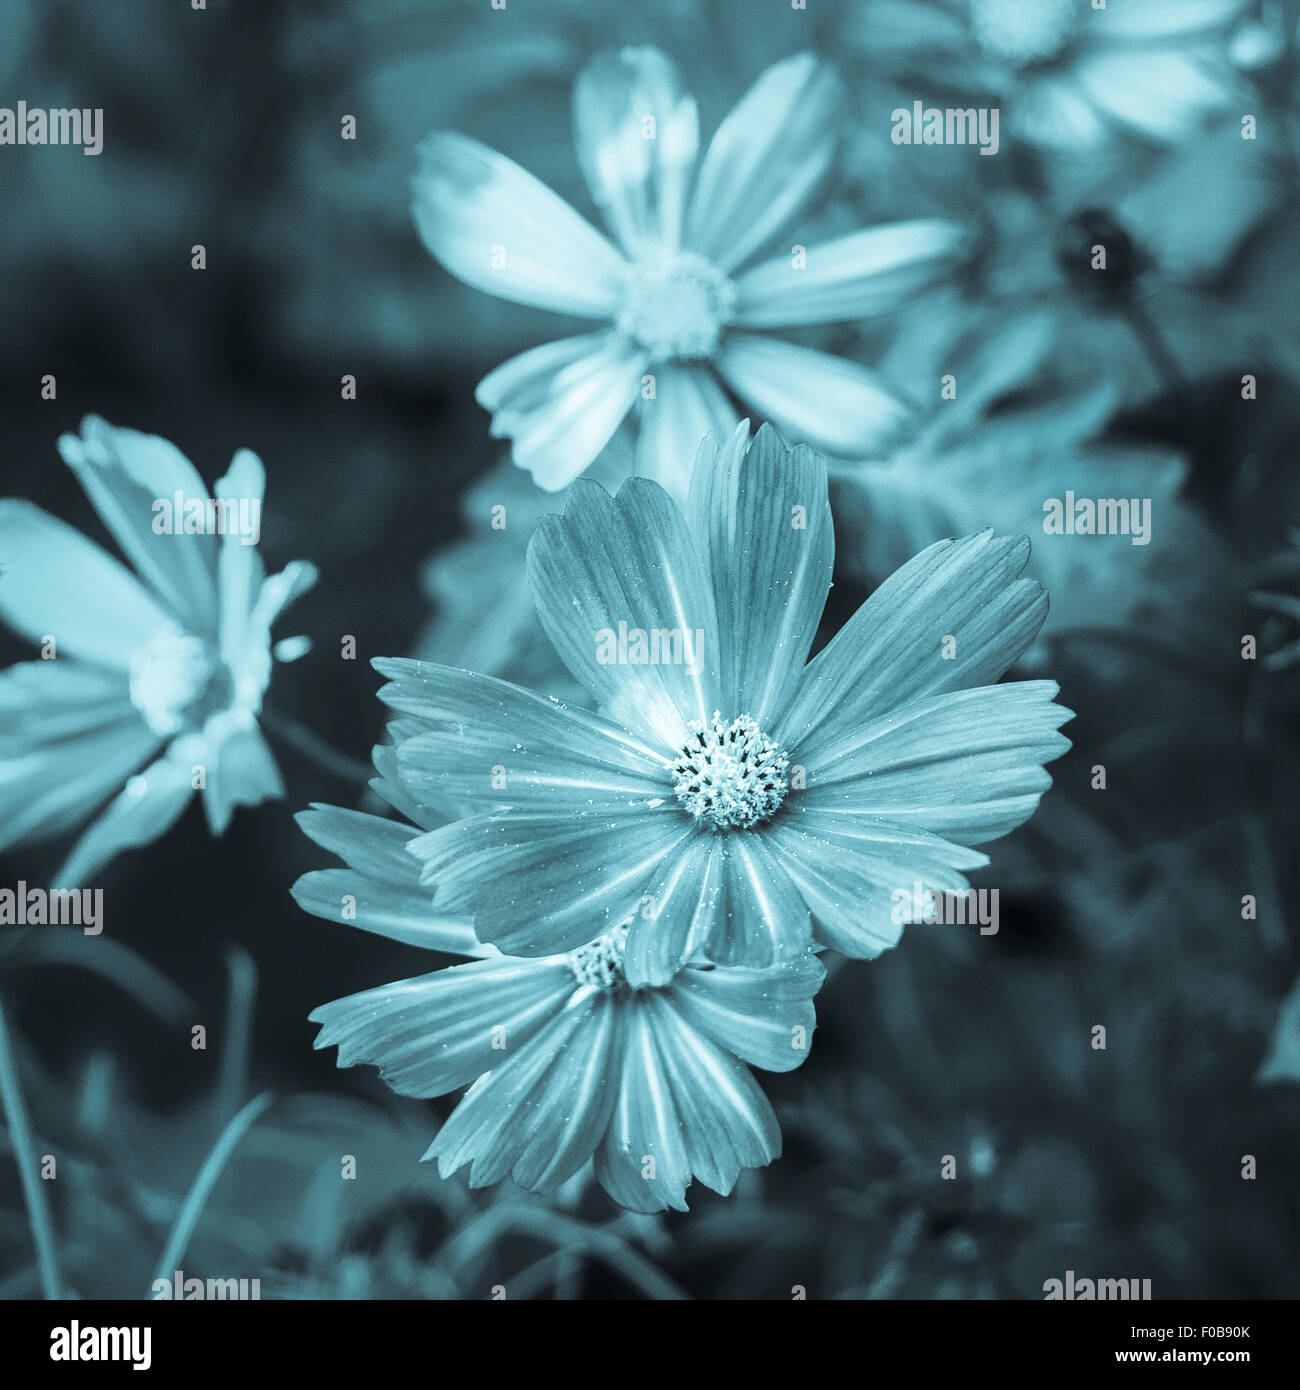 Beautiful cosmos flowers bloom in a summer garden. Cyanotype process photograph Asteraceae family Square format copy space Stock Photo